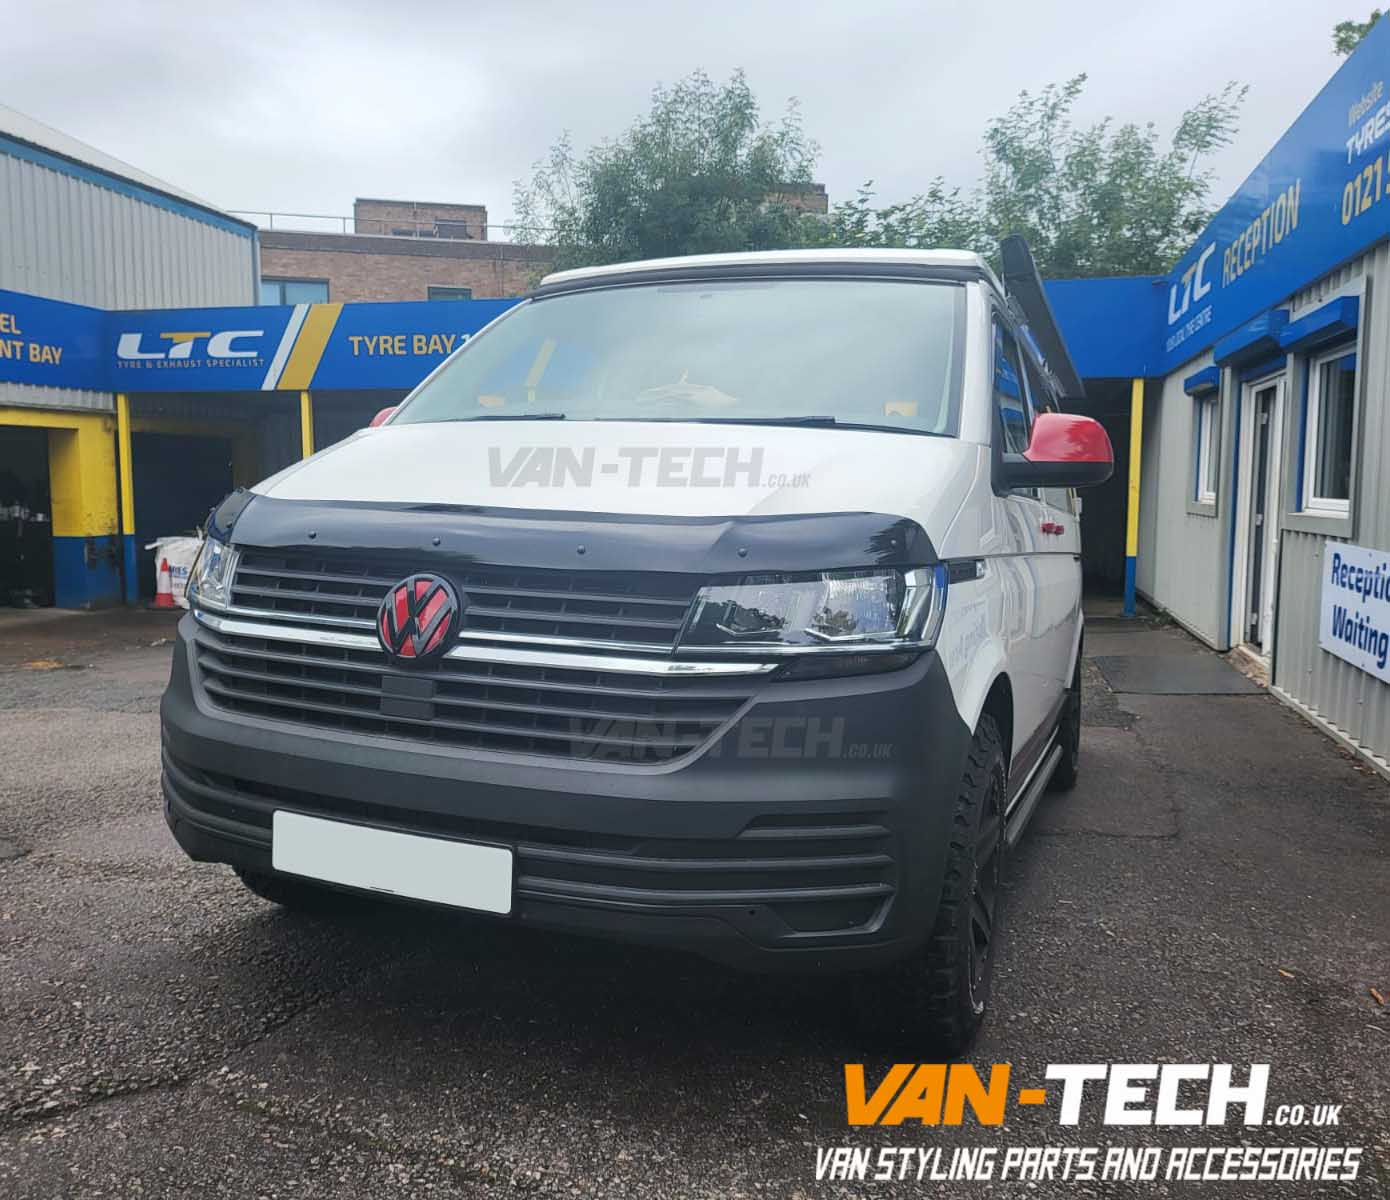 VW Transporter T6.1 Swamper Parts and Accessories available at Van-Tech